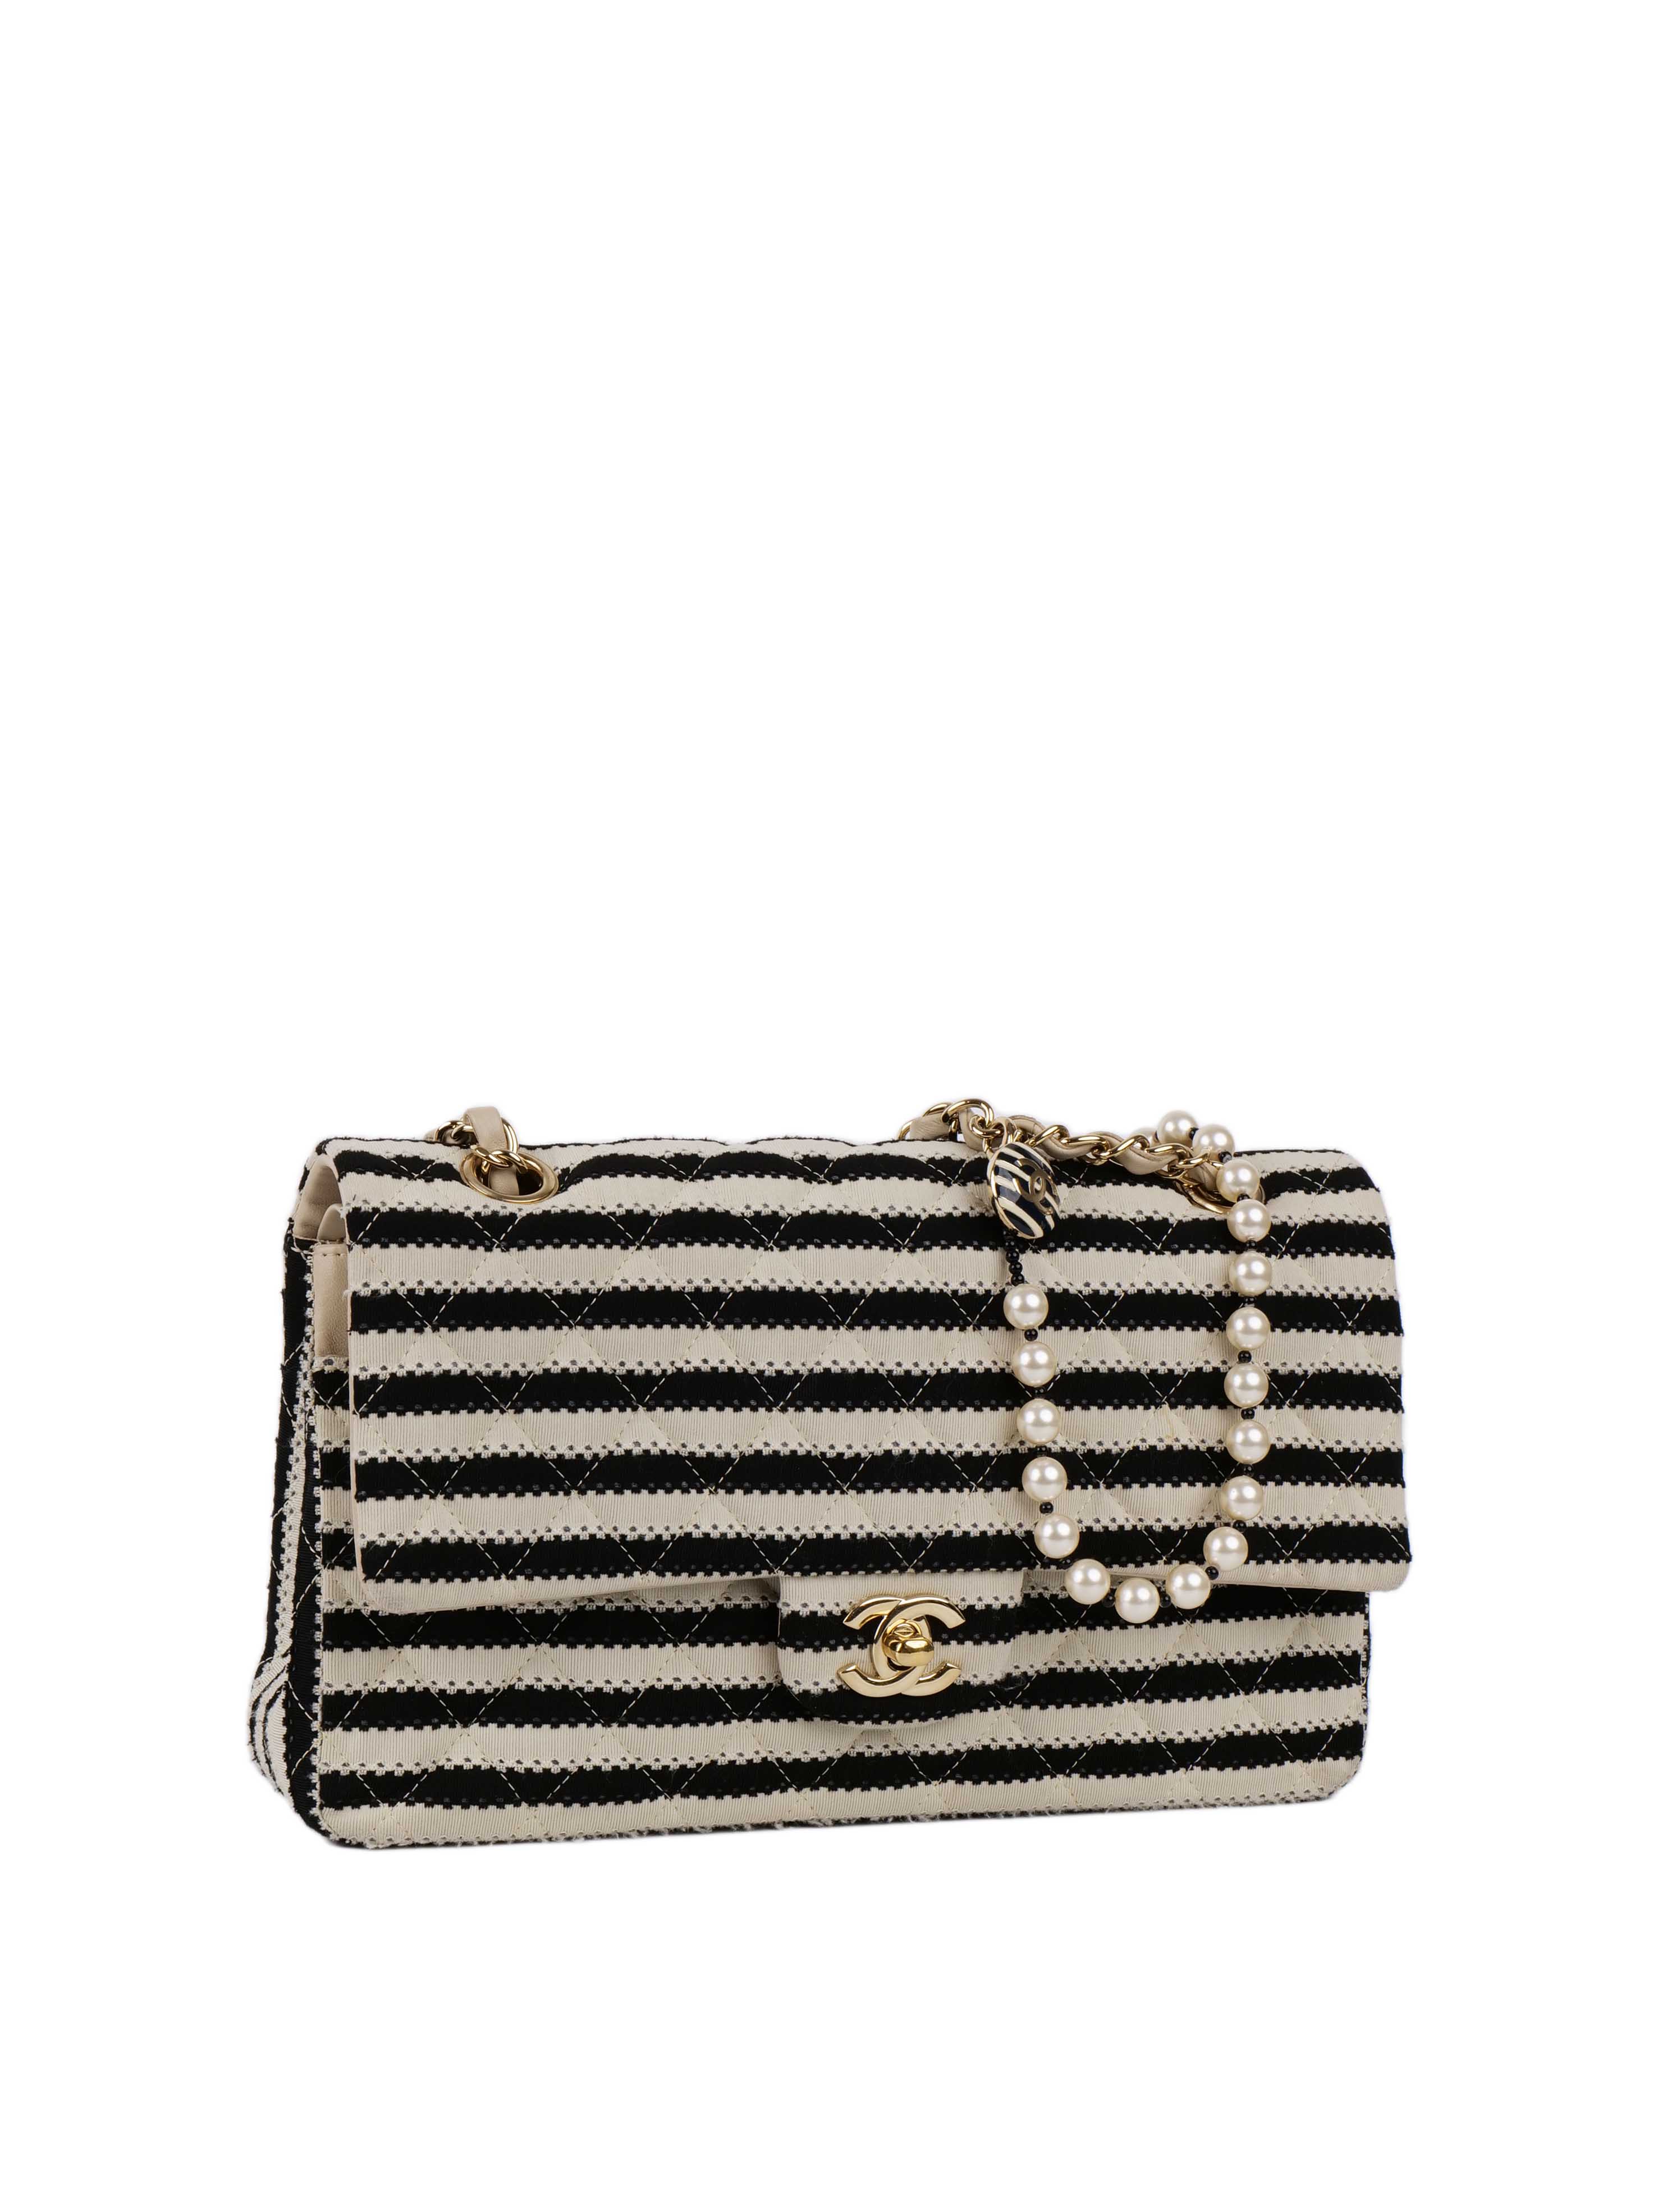 Chanel White & Black Striped Classic Flap with Pearl & Chain Strap.